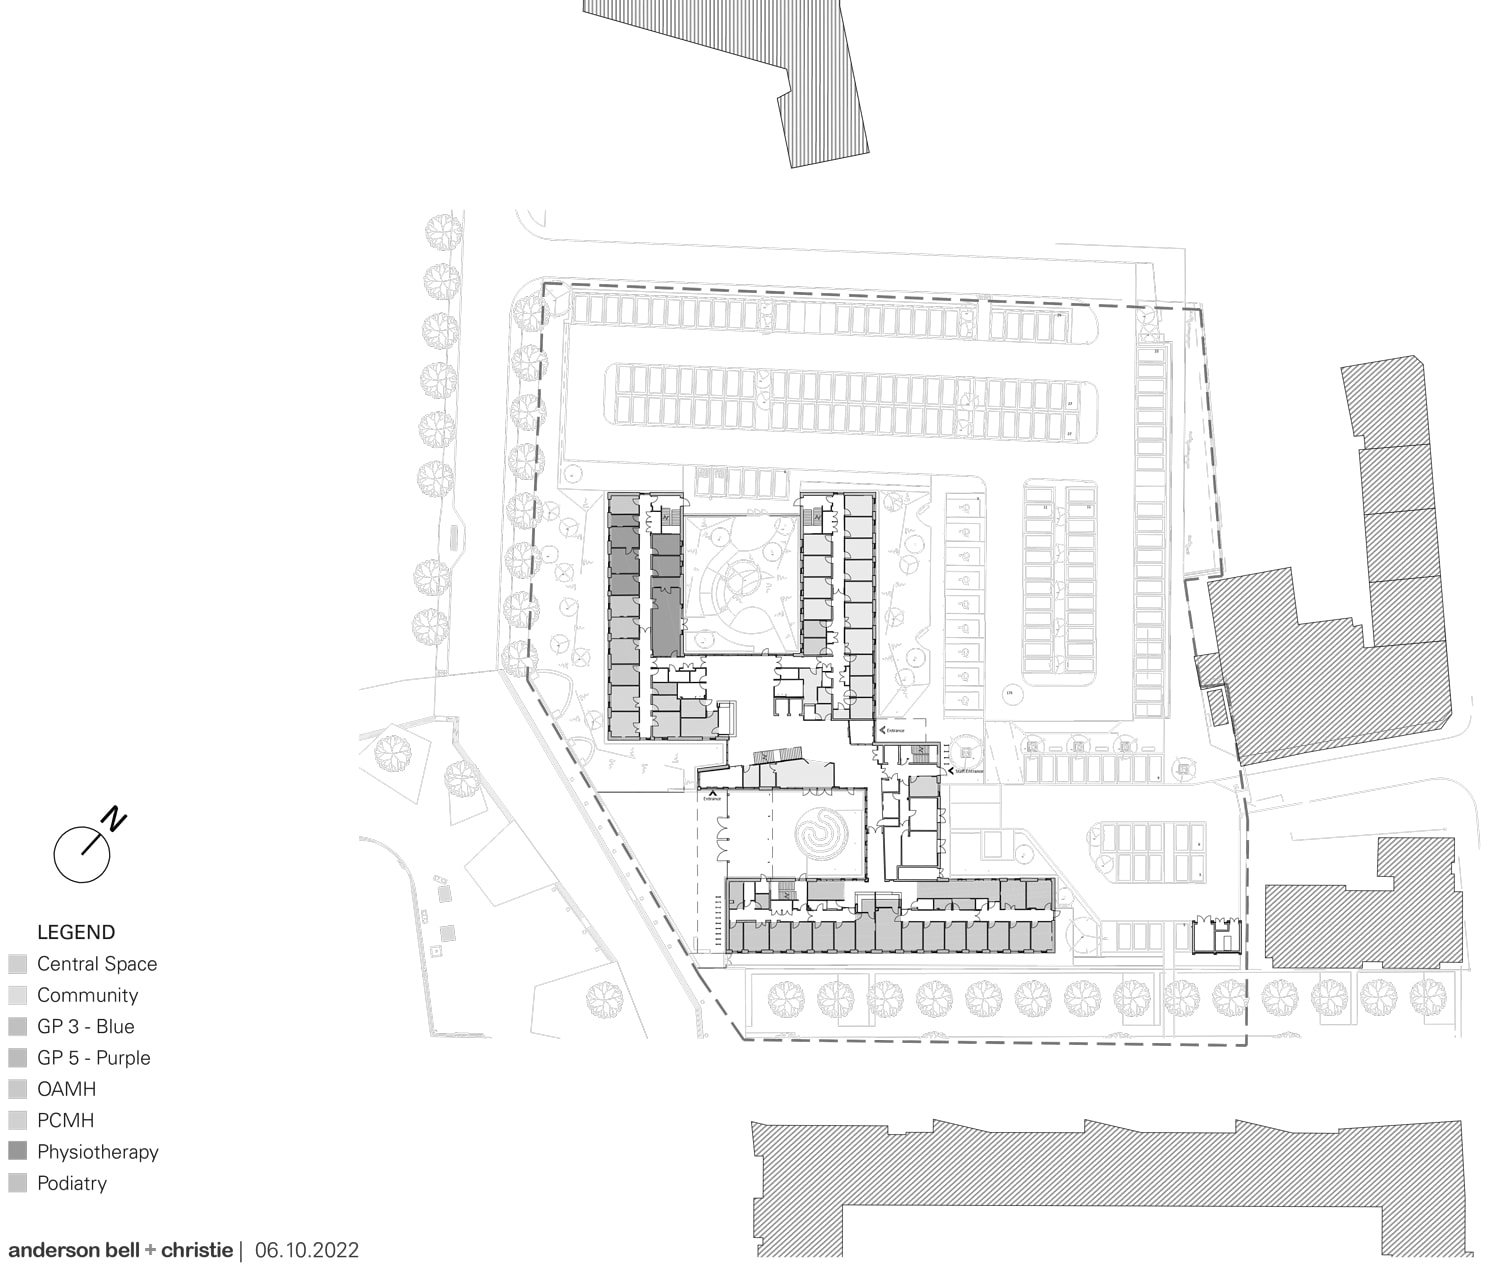 gia-design-awards-2022-healthcare-award-anderson-bell-christie-architects-clydebank-health-and-care-centre-photographer-keith-hunter-site-plan-min.jpg